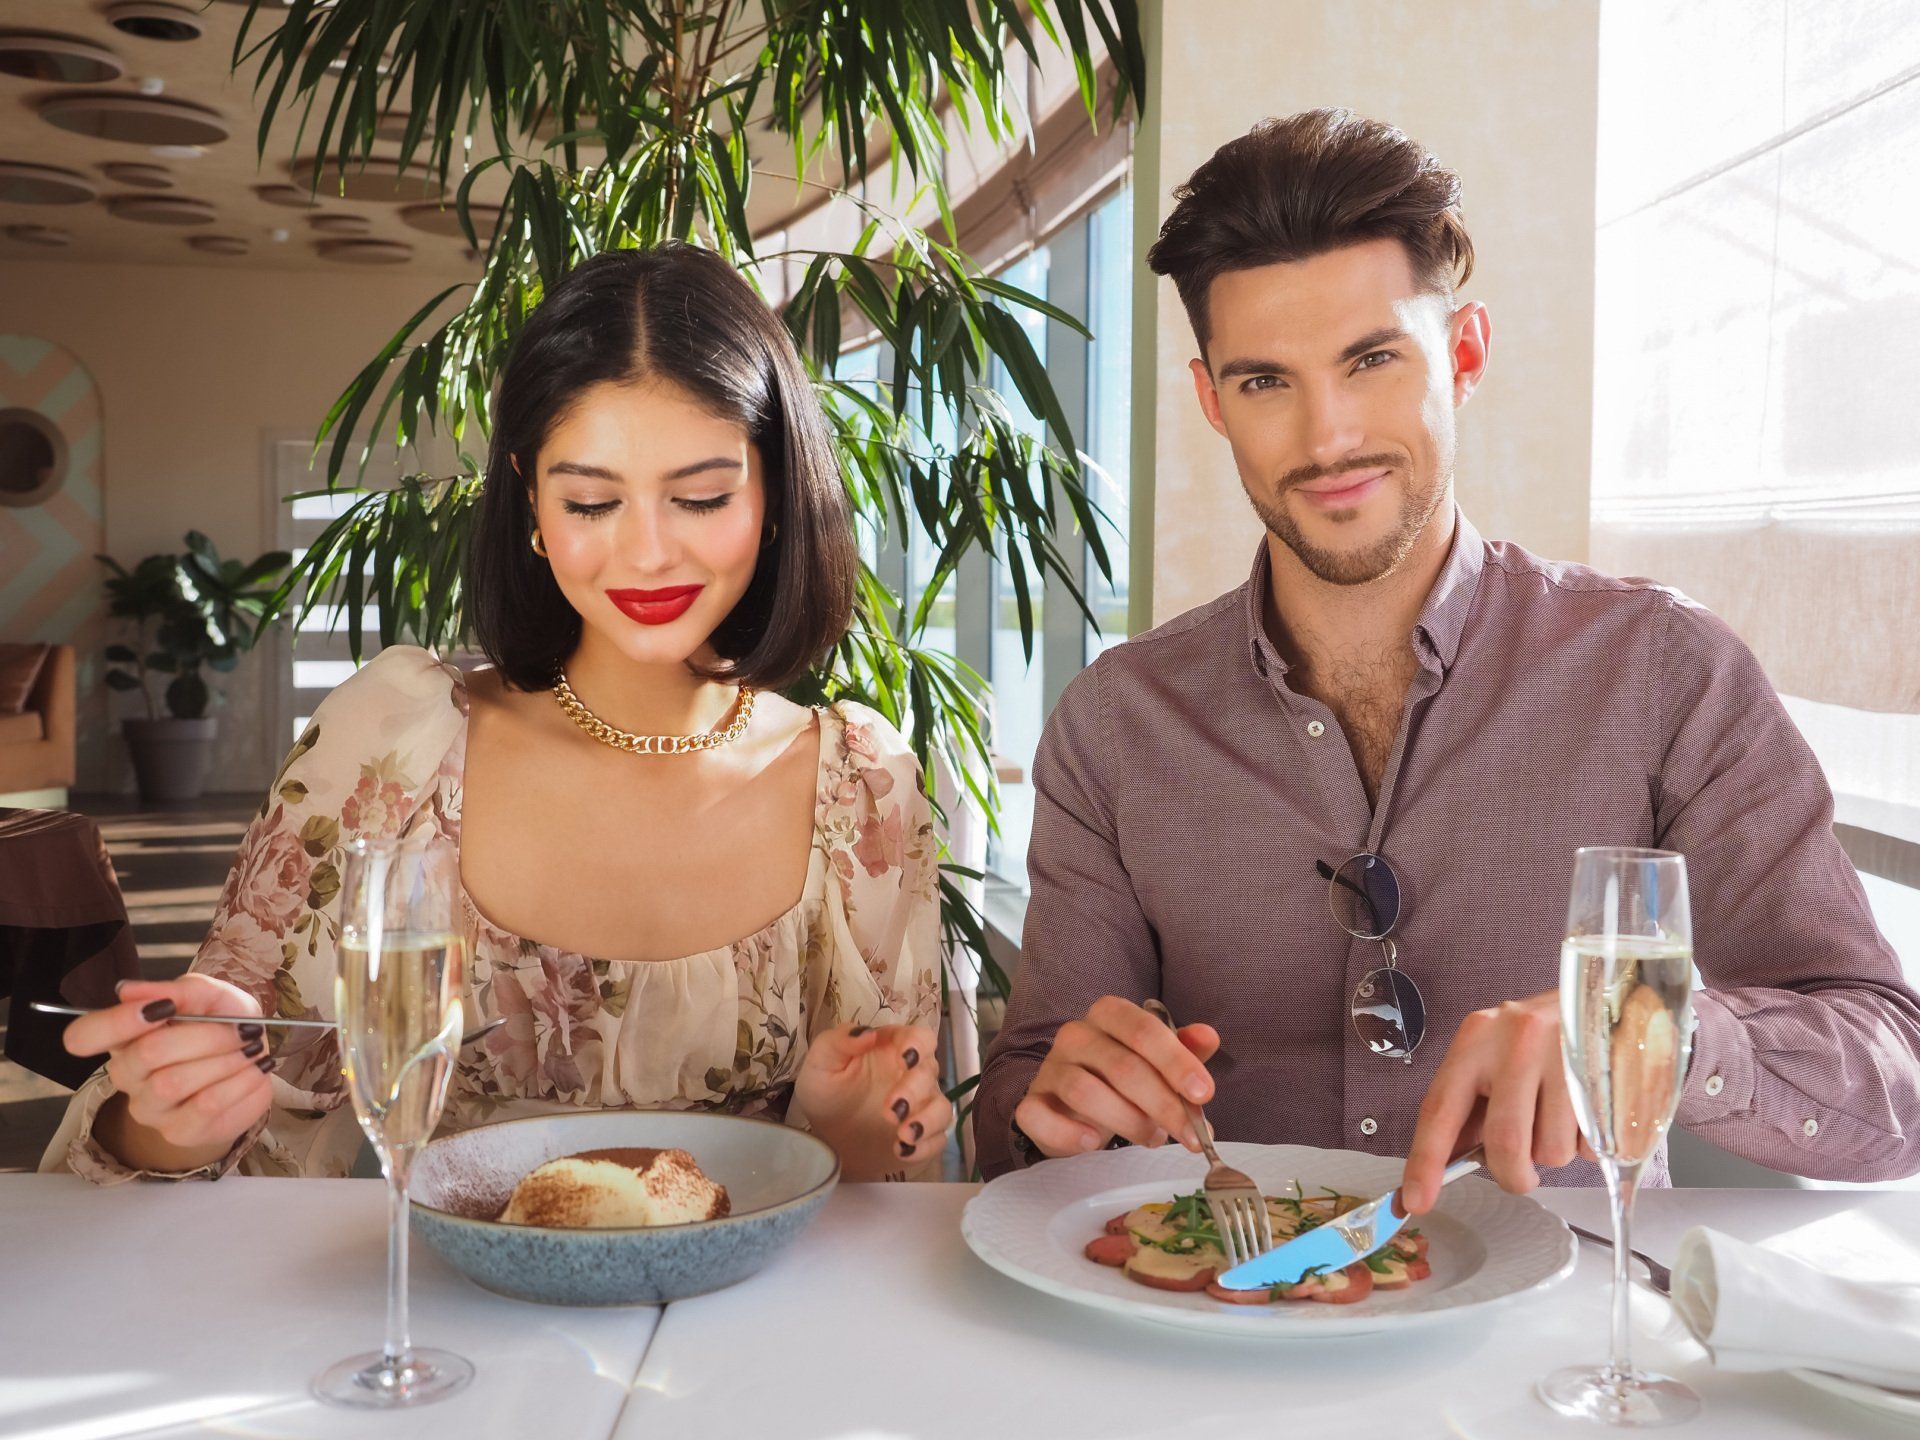 A man and a woman are sitting at a table eating food and drinking champagne.